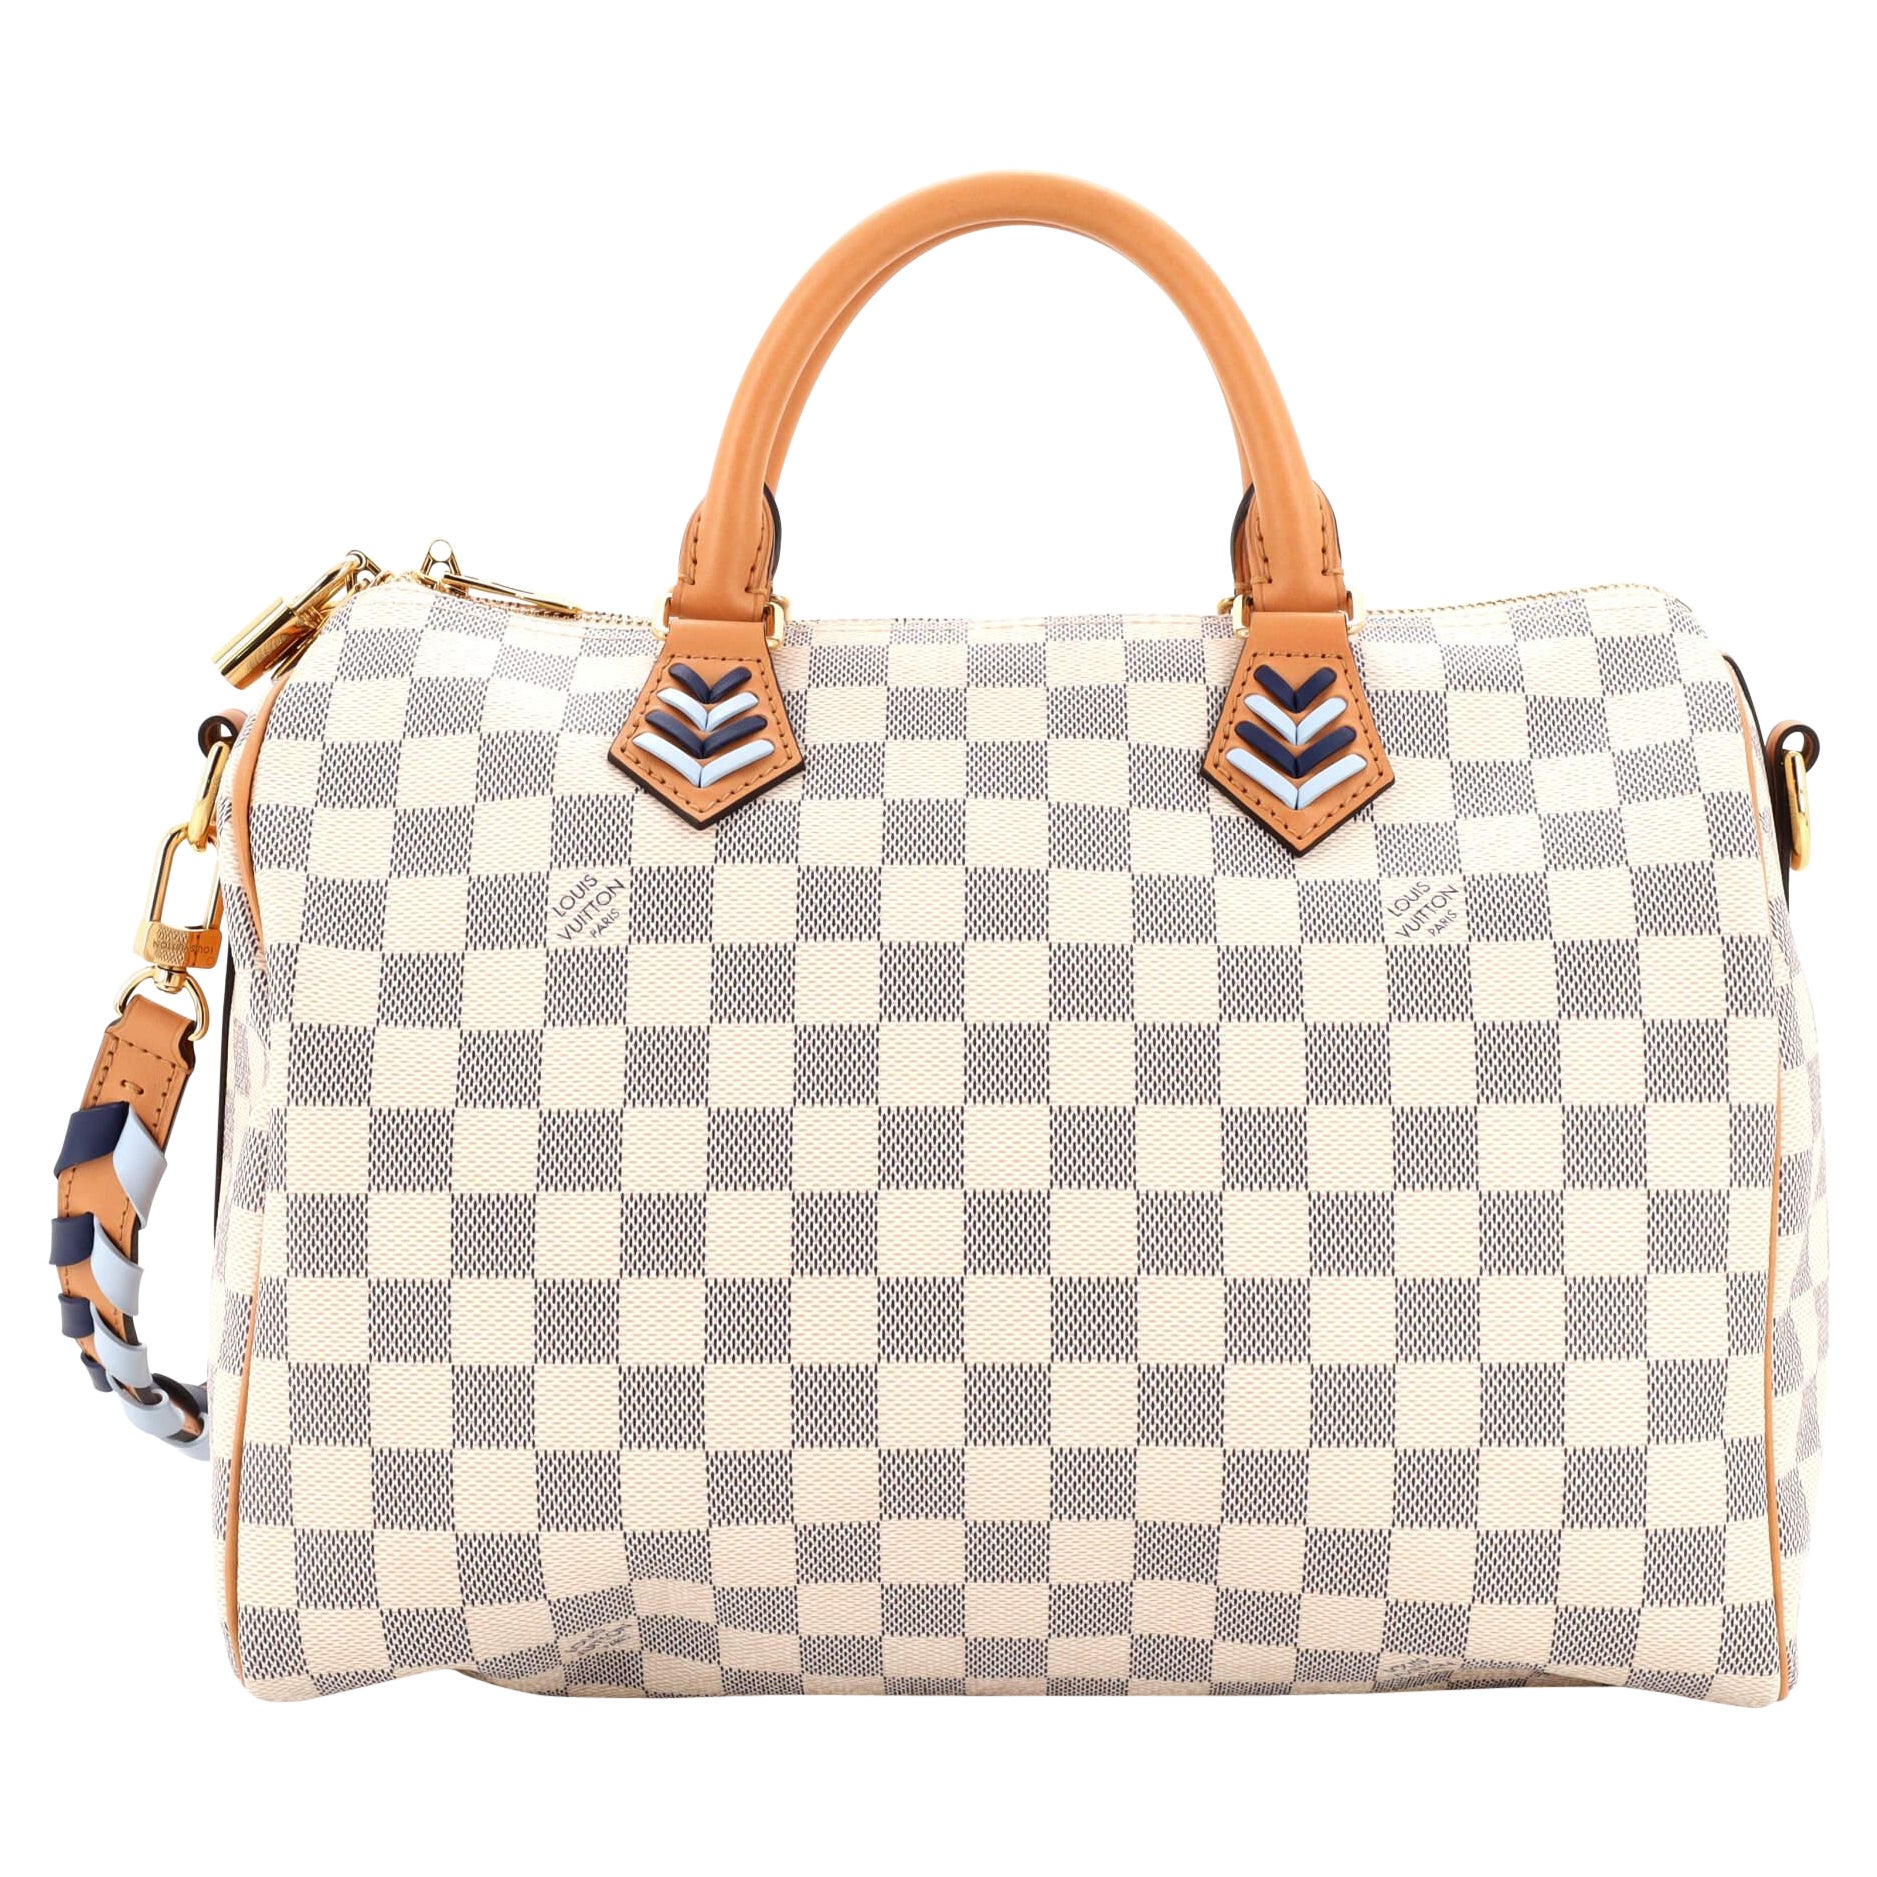 Louis Vuitton Chantilly Monogram - For Sale on 1stDibs